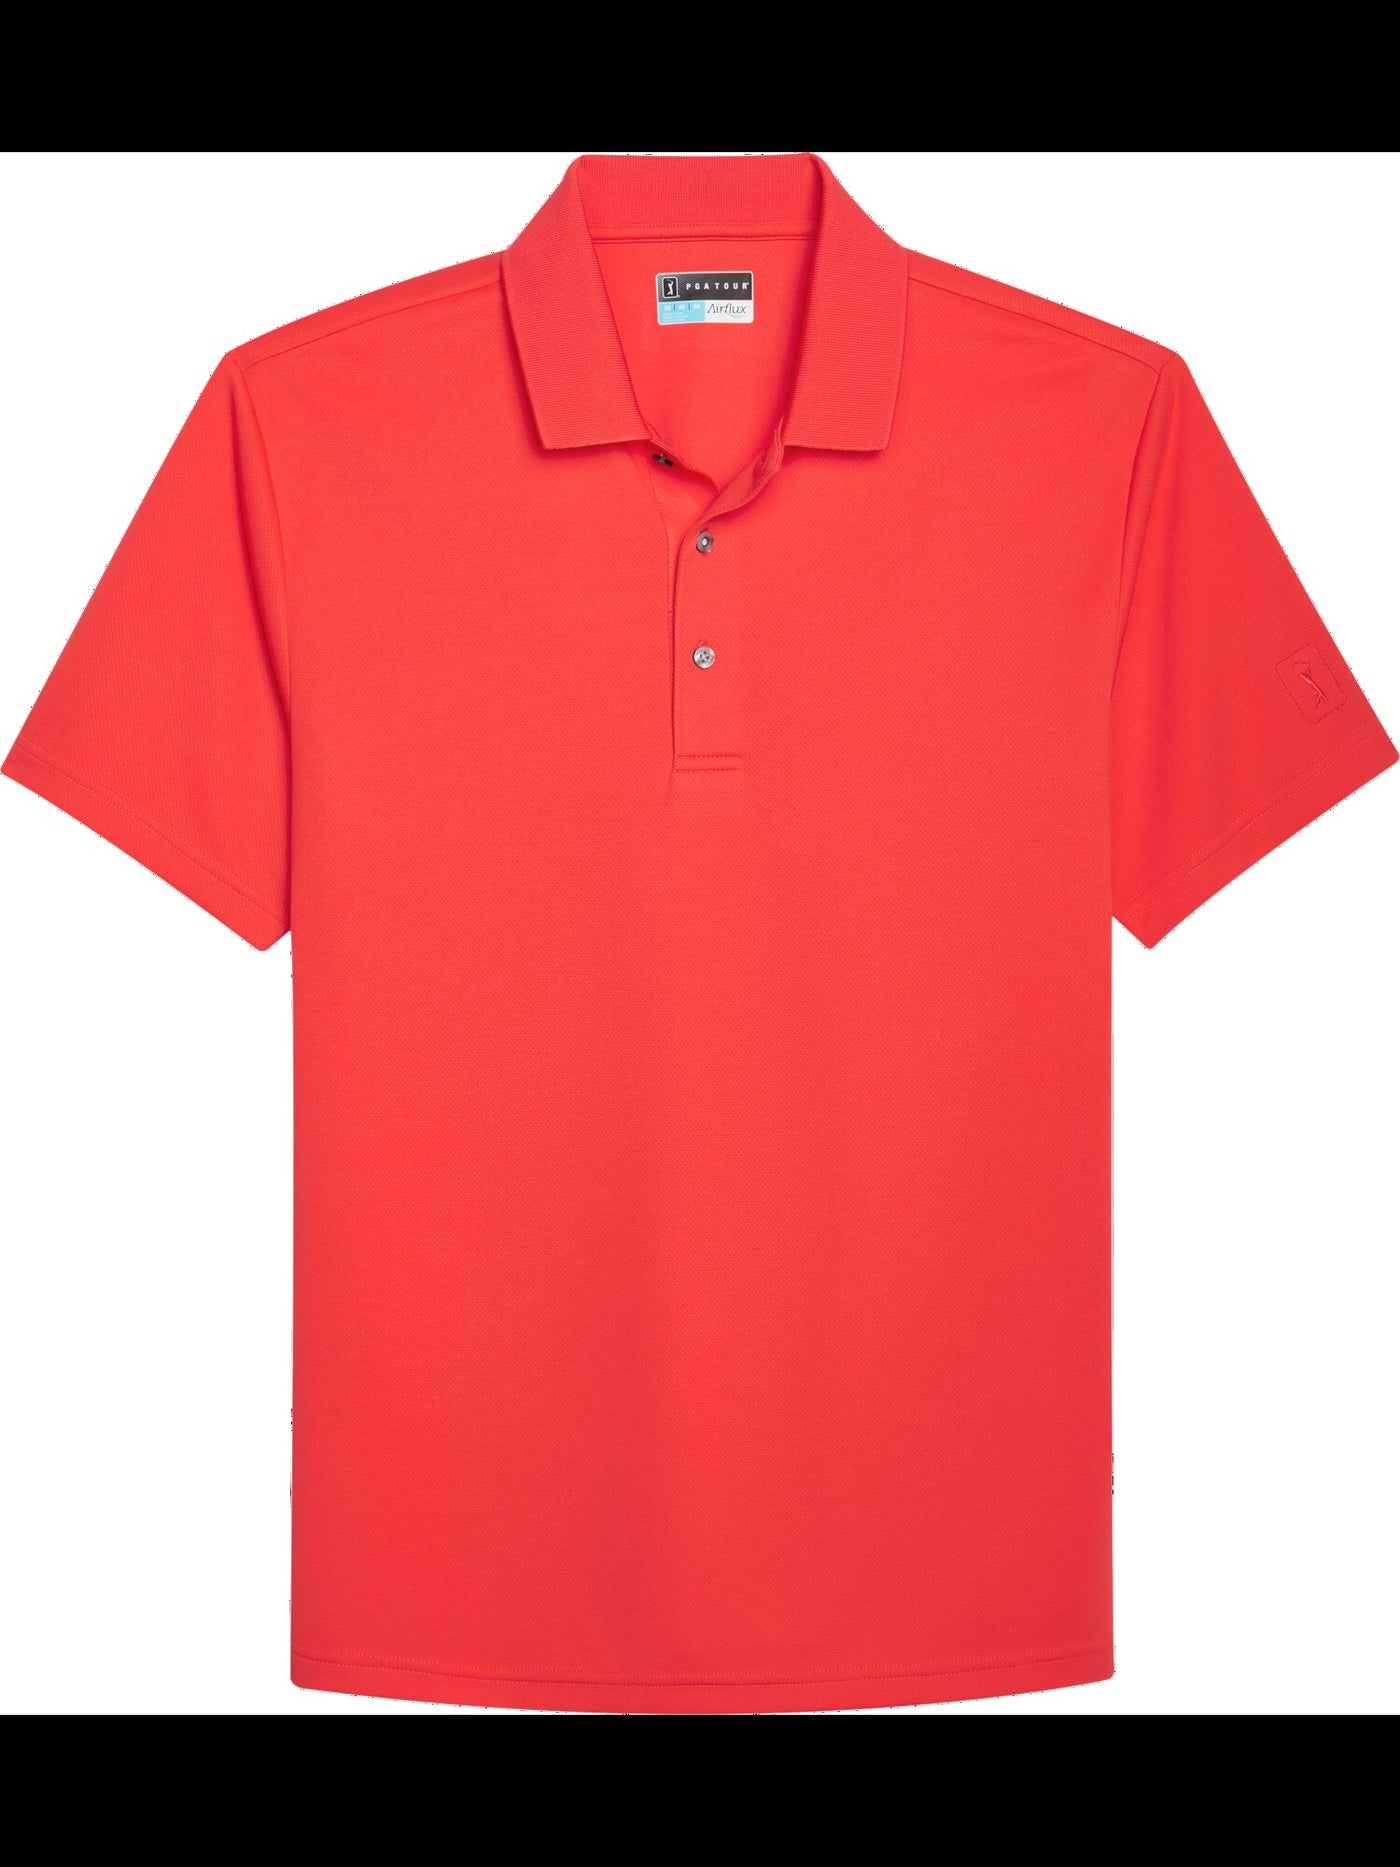 HYBRID APPAREL Mens Coral Athletic Fit Moisture Wicking Polo S